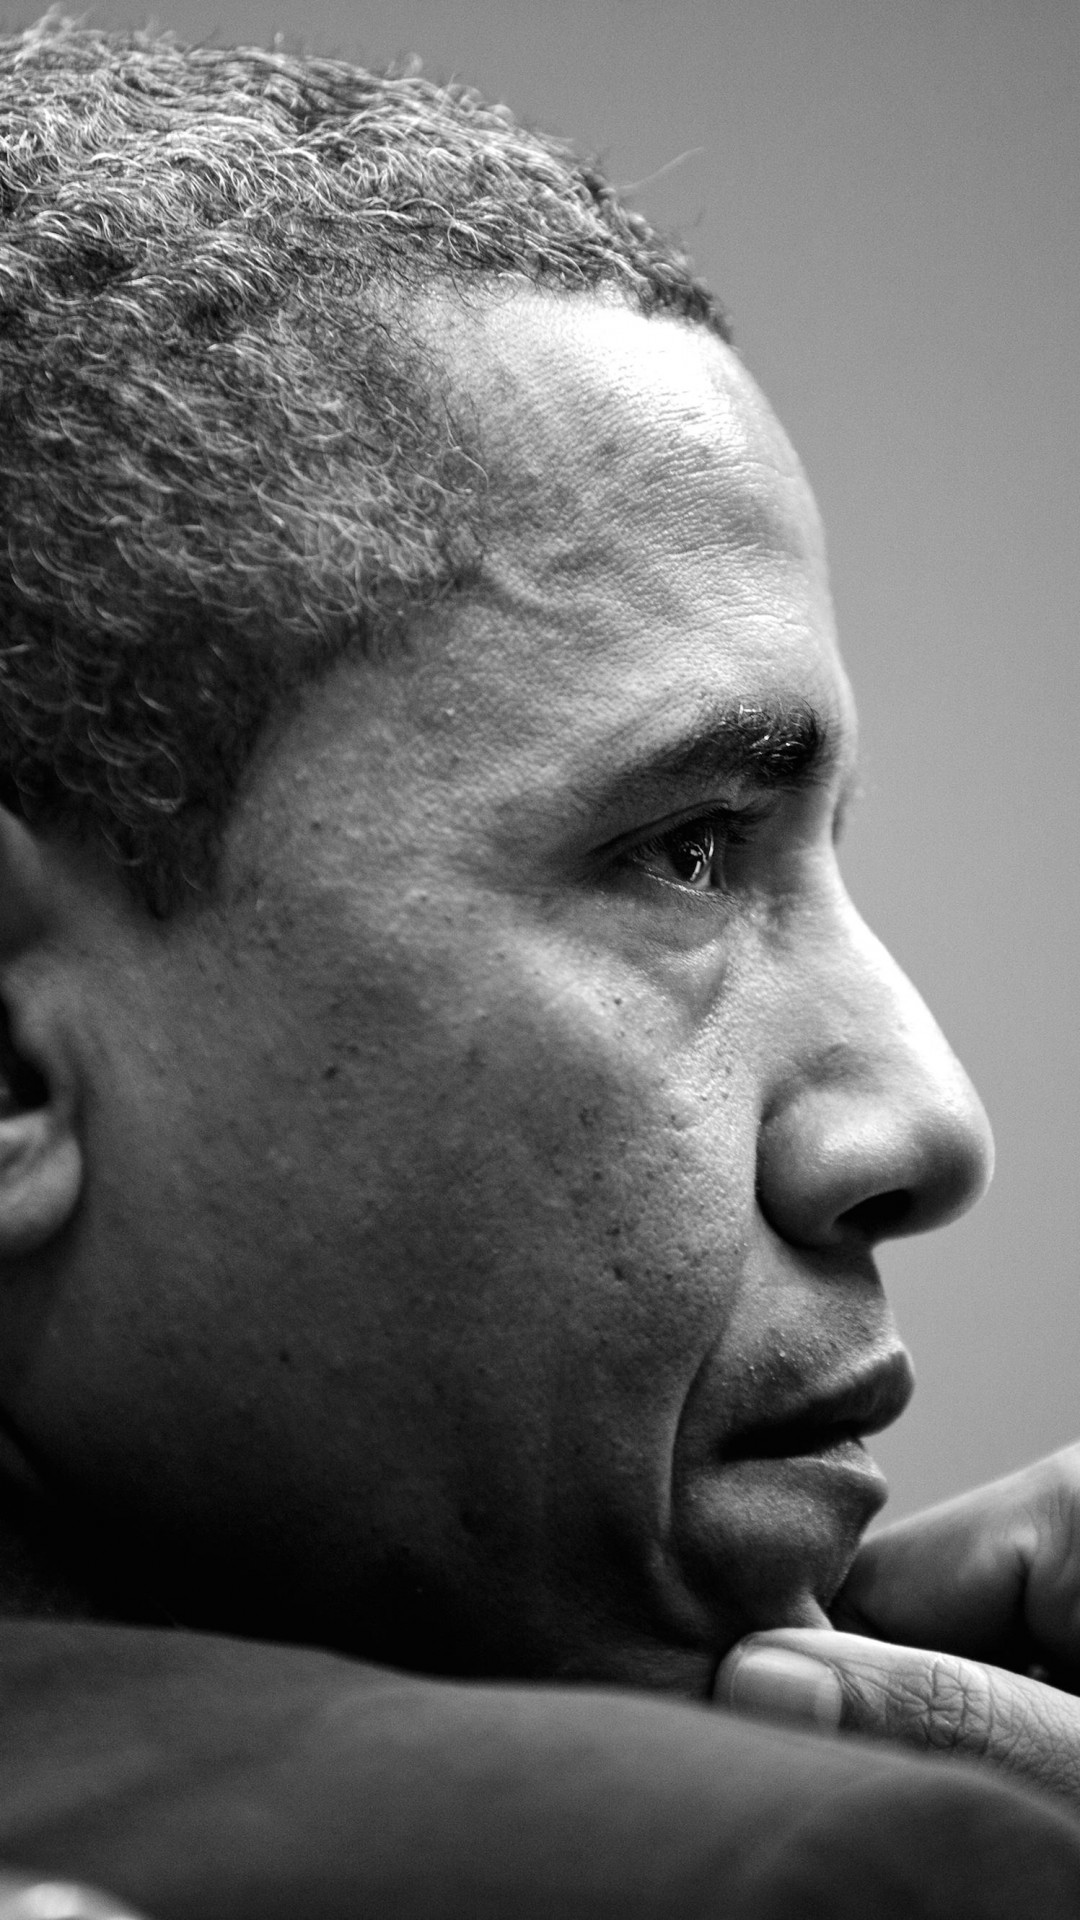 Barack Obama in Black & White Wallpaper for SAMSUNG Galaxy Note 3